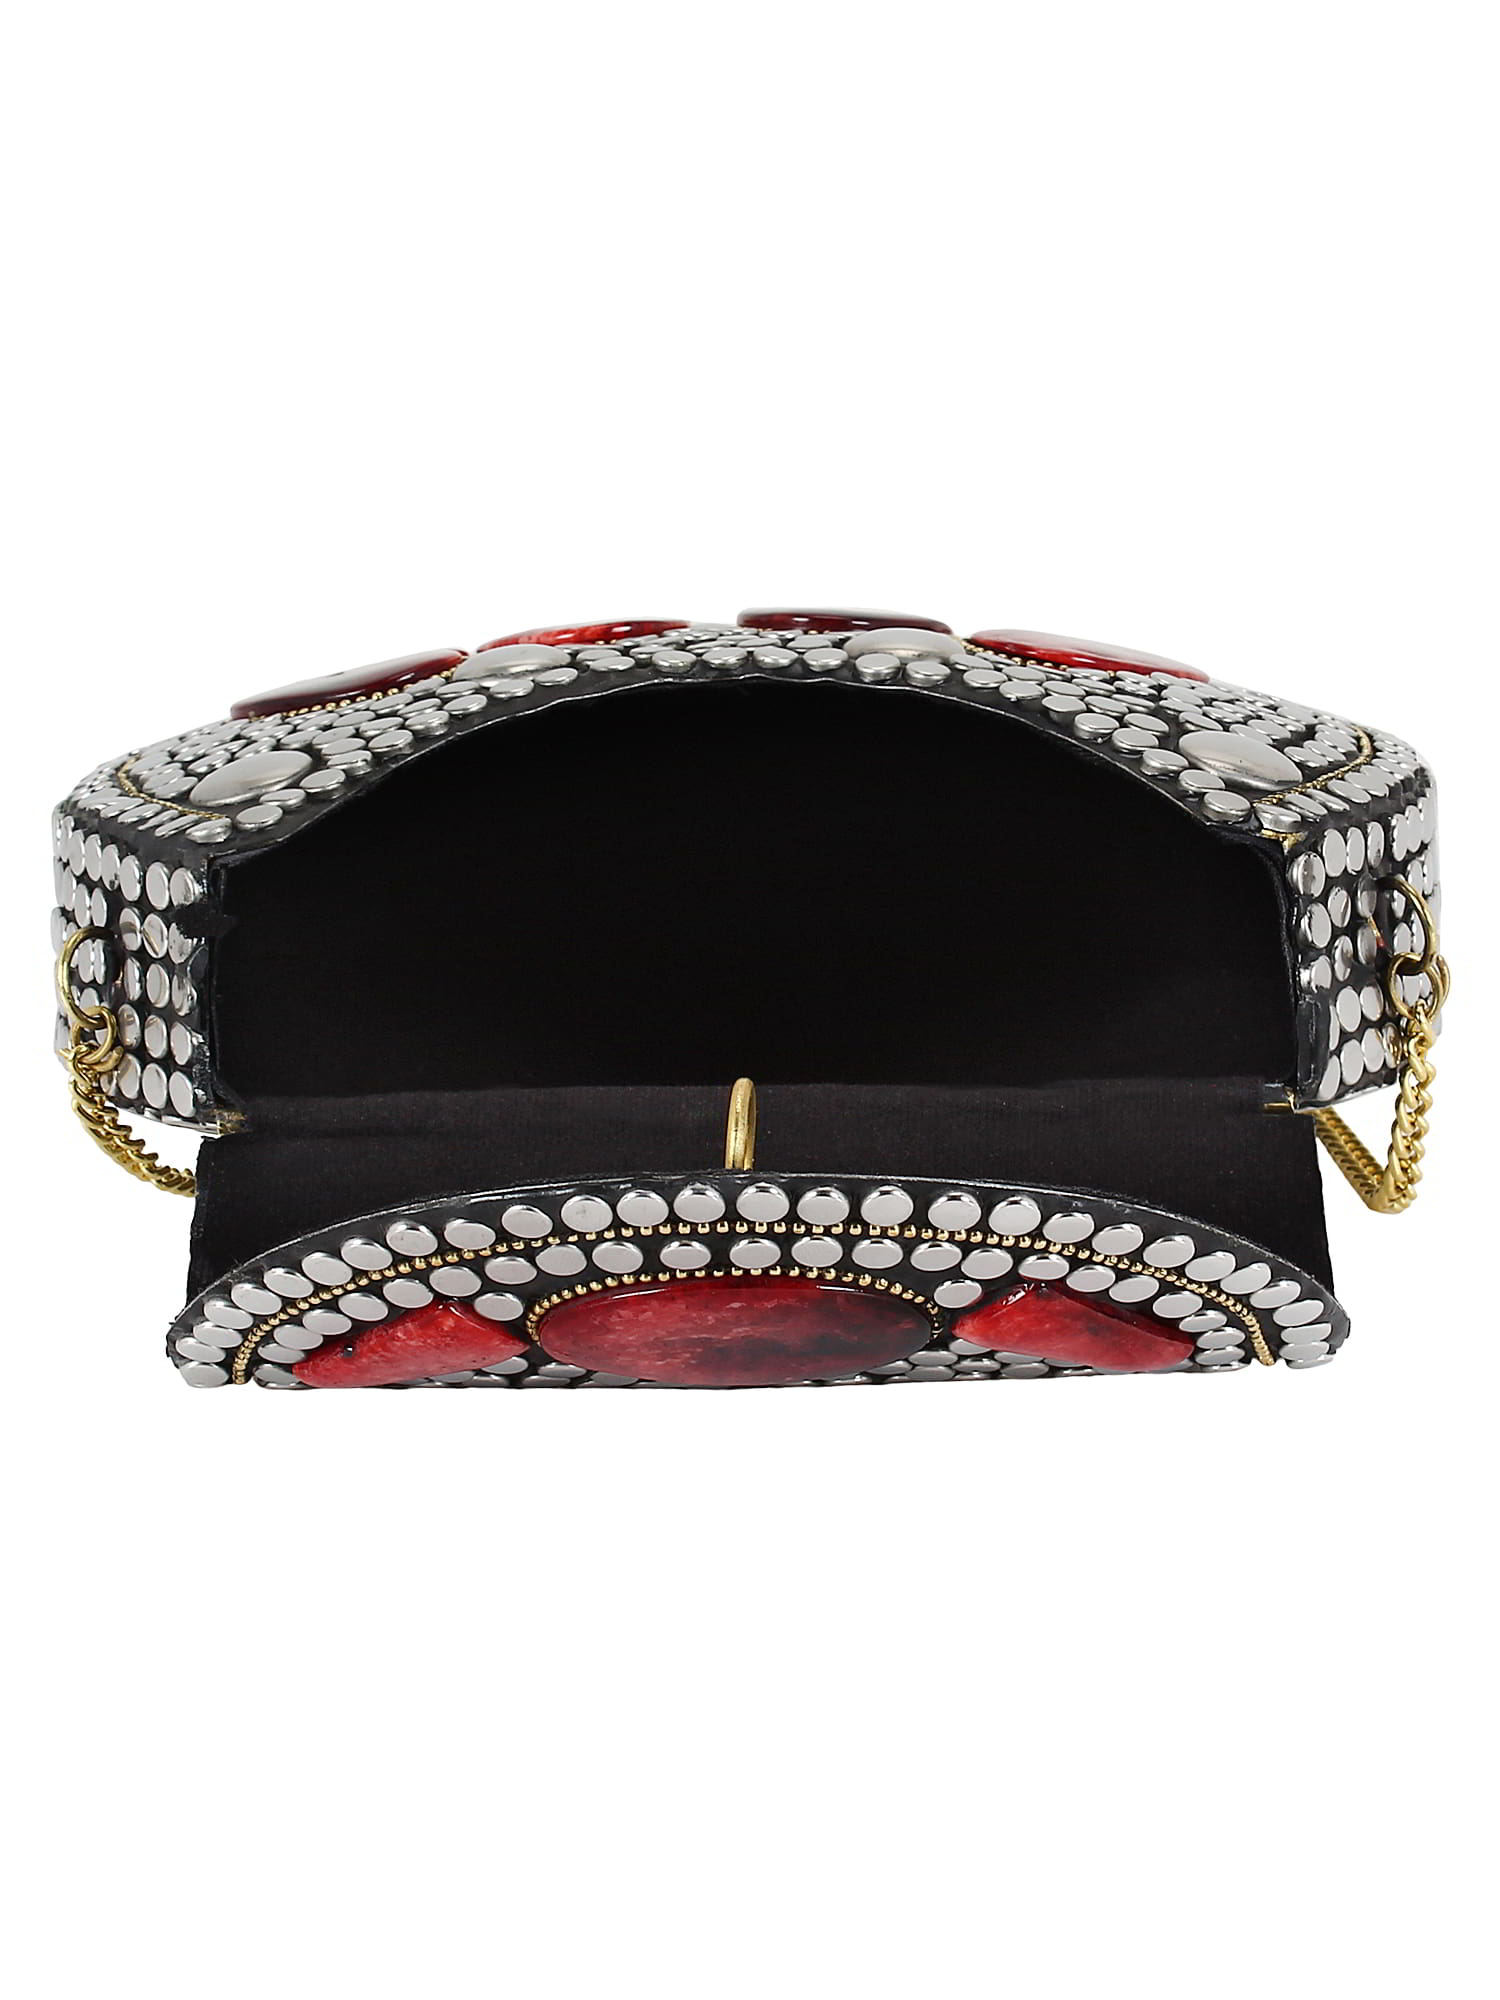 Jewel Mosaic Design Metal and Stone Work Party Clutch